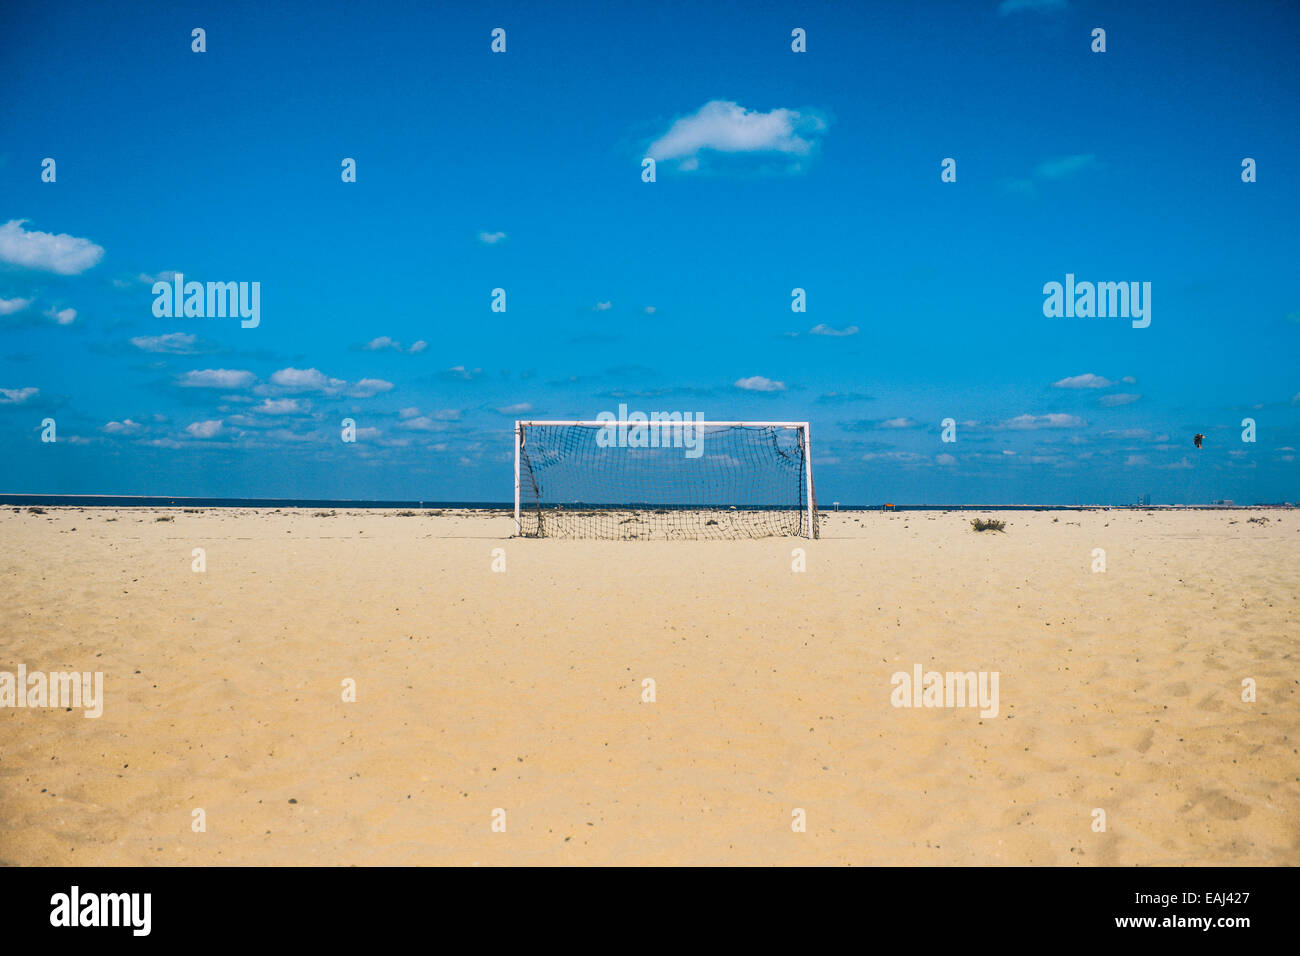 Stock photo- Qatar 2022 gets ready for the world cup with goal posts on a beach in the middle east Stock Photo